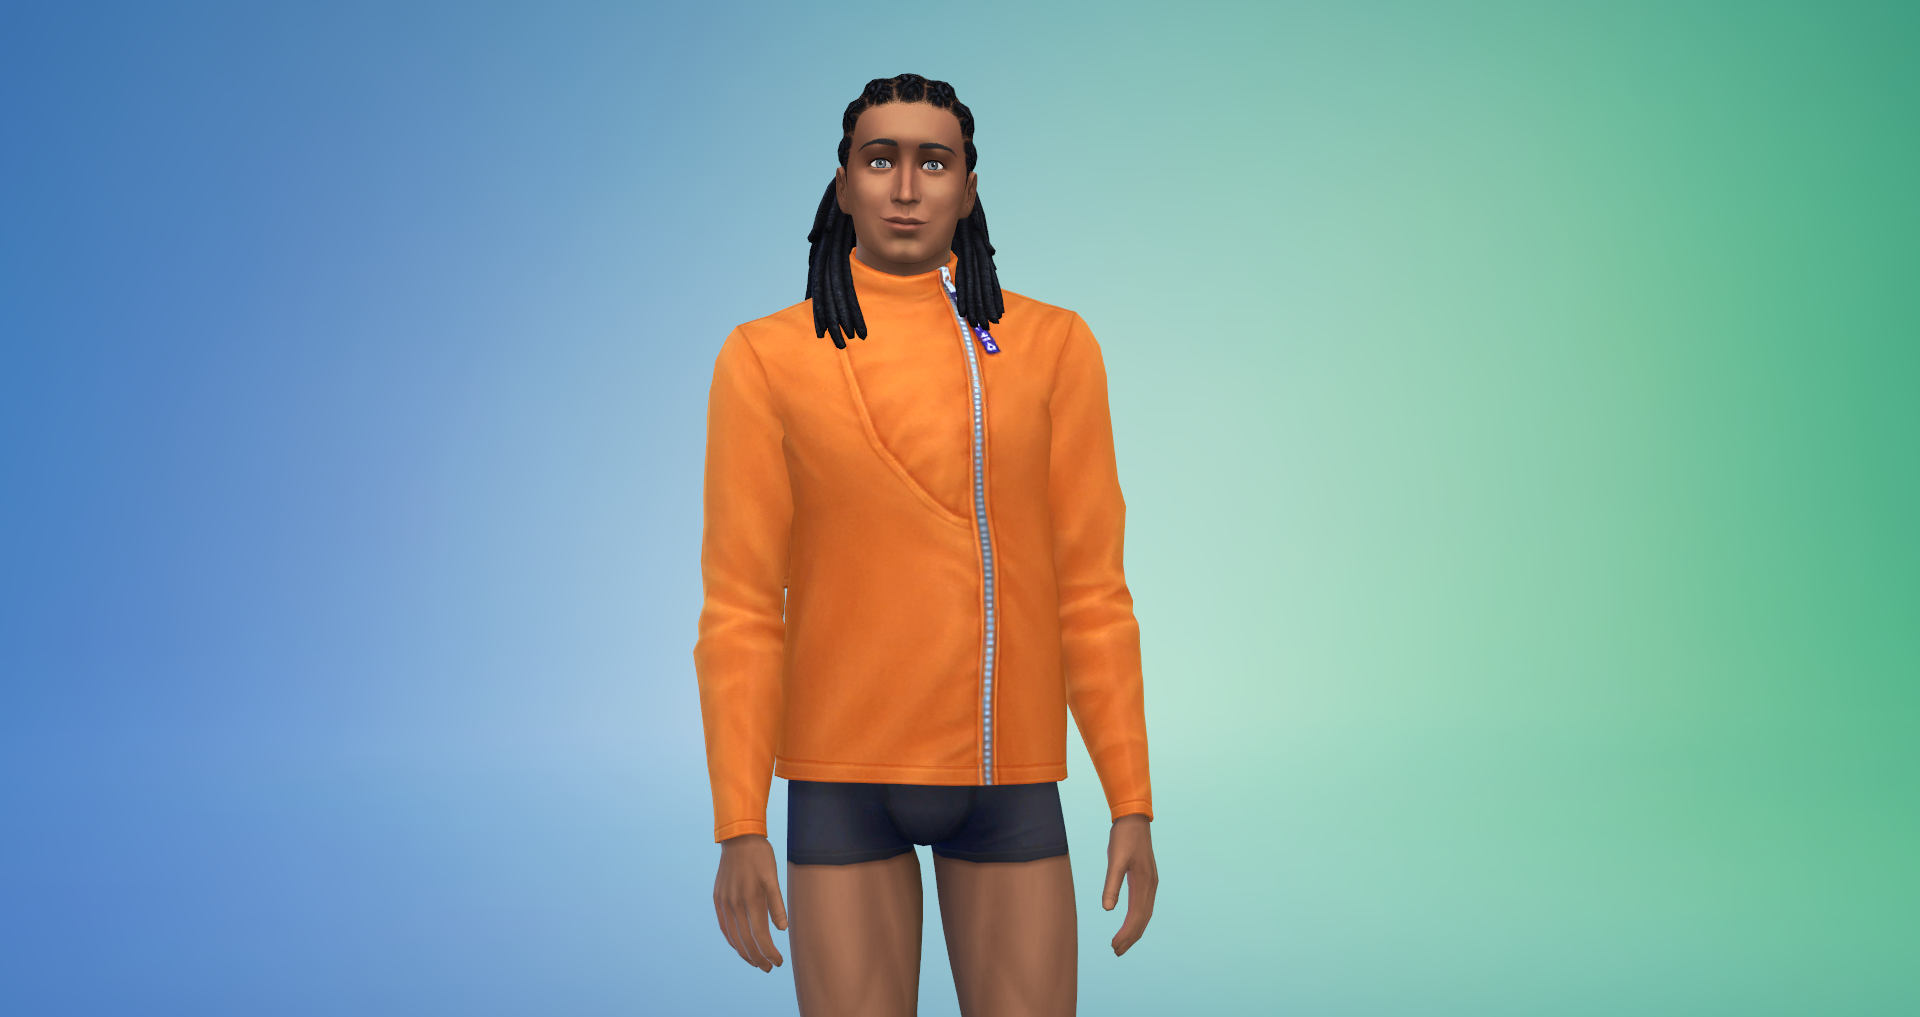 Sims 4 Fitness Guide CAS 13